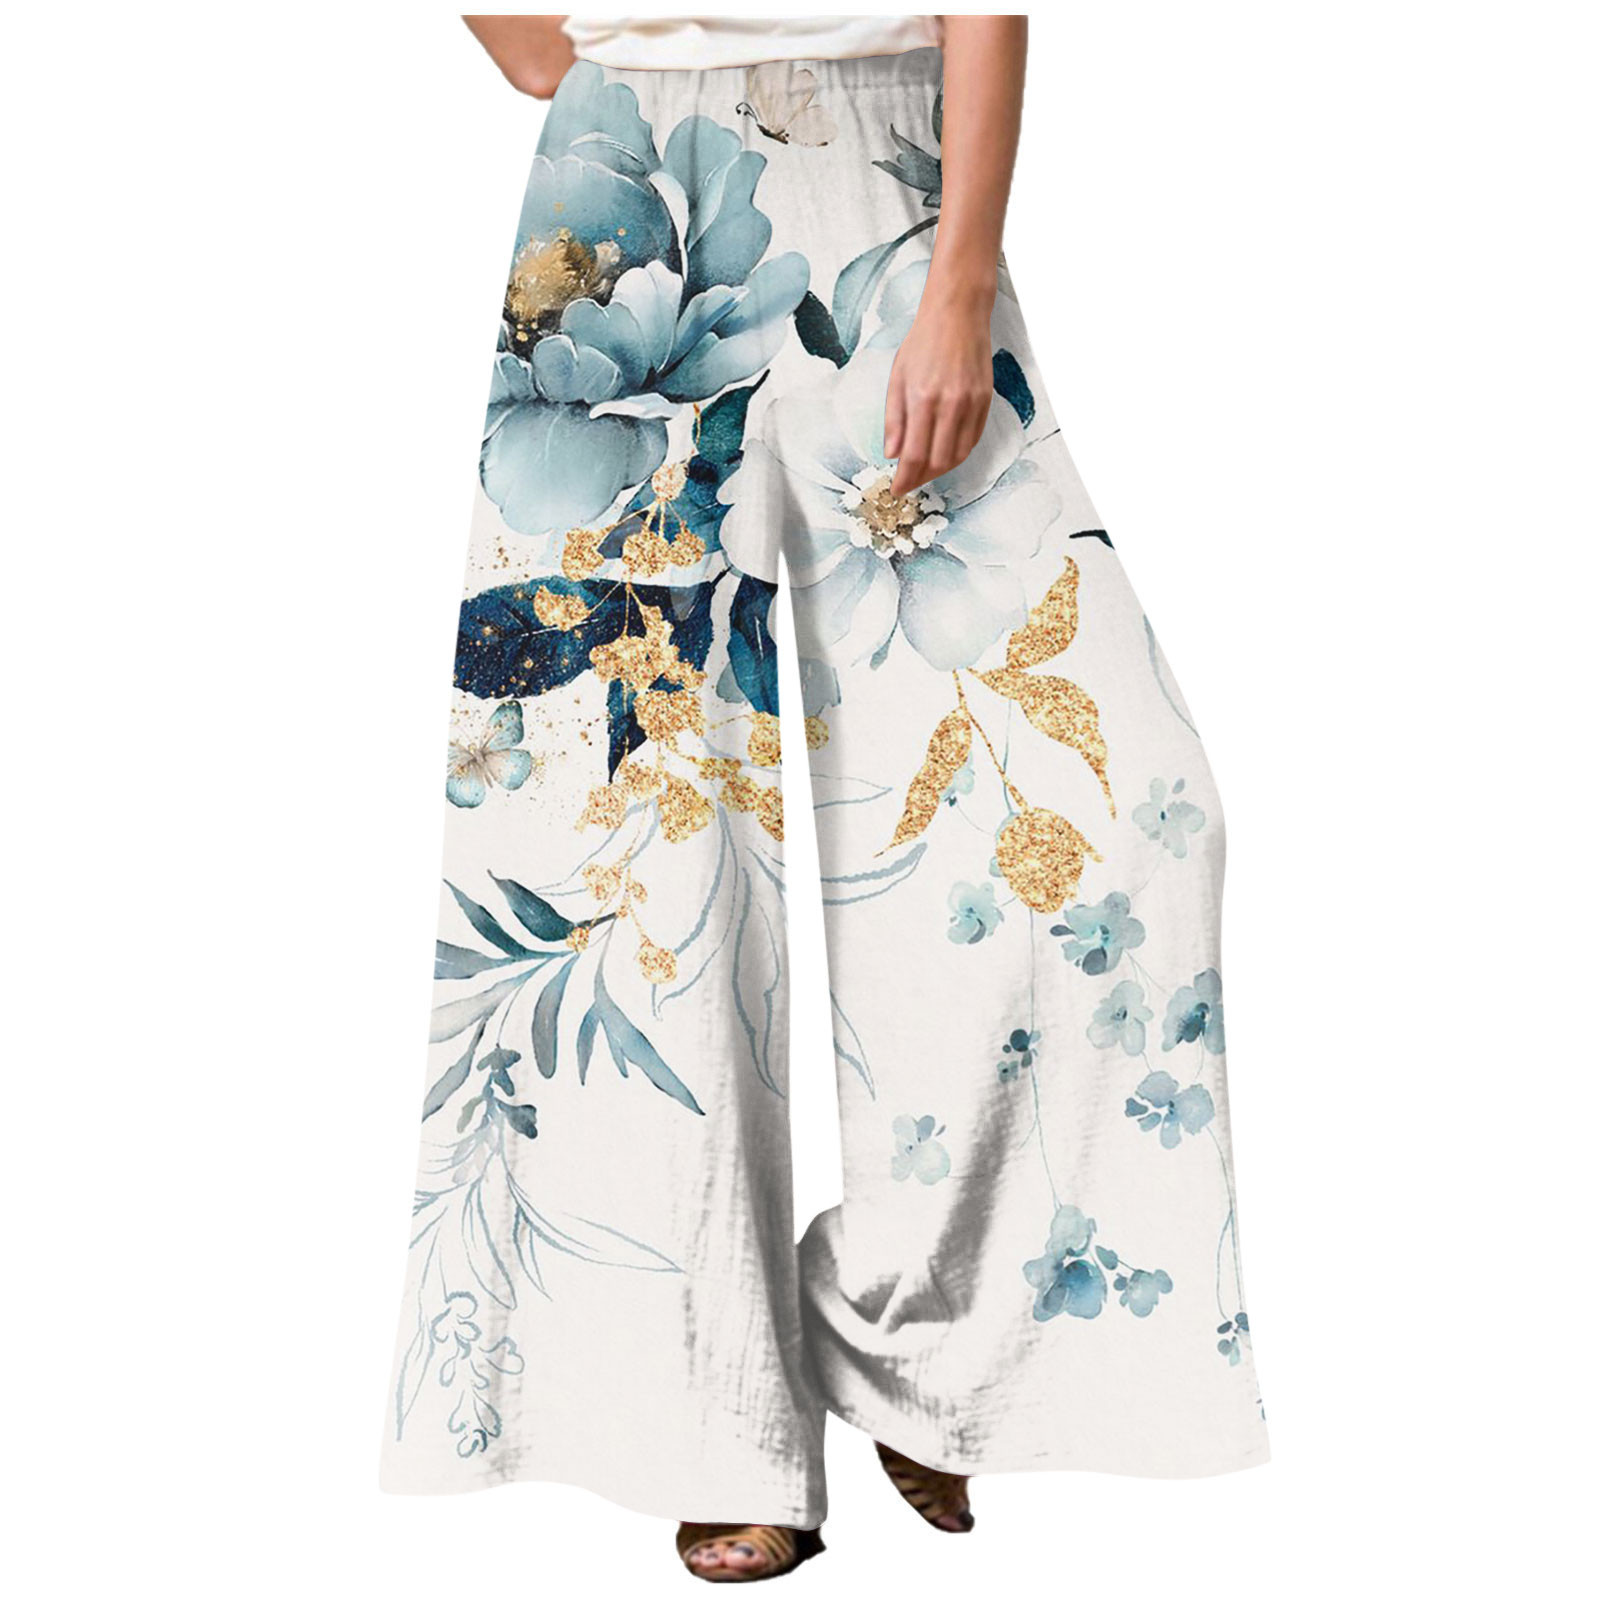 Wide Leg Trousers for Women Summer Baggy Ladies Pants High Waisted ...